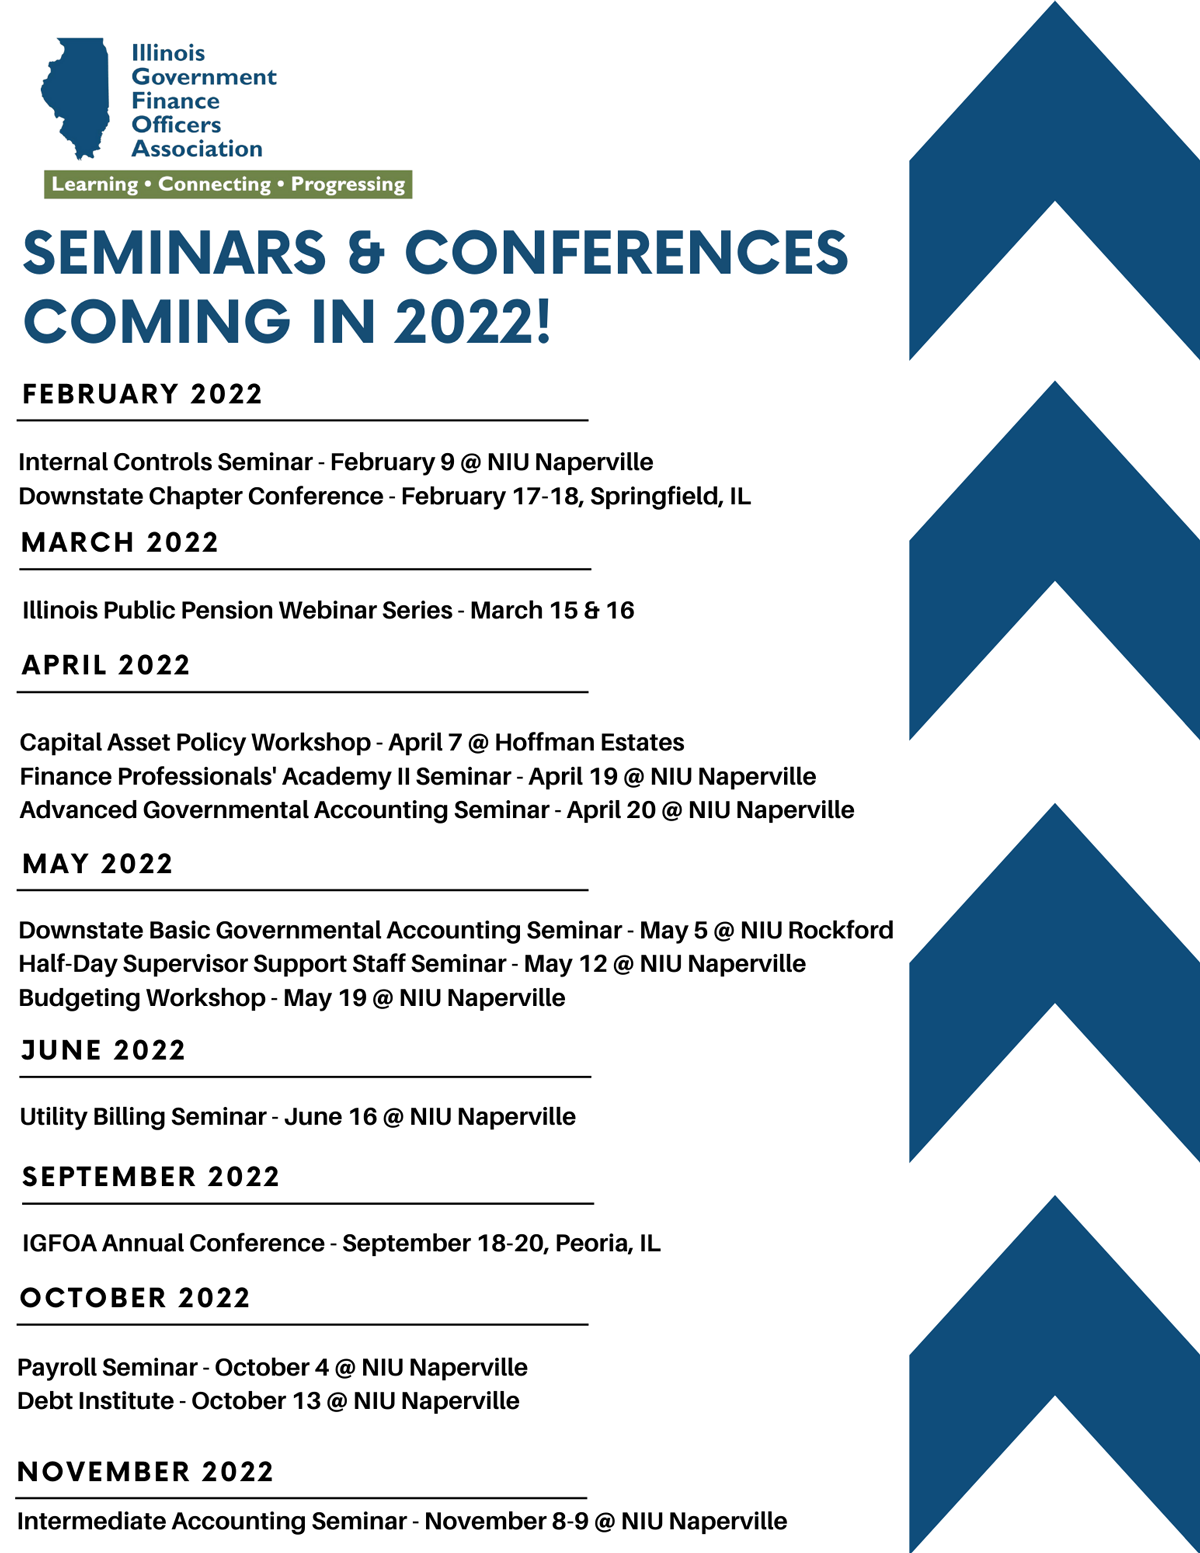 Illinois Government Finance Officers Association seminars and conferences 2022